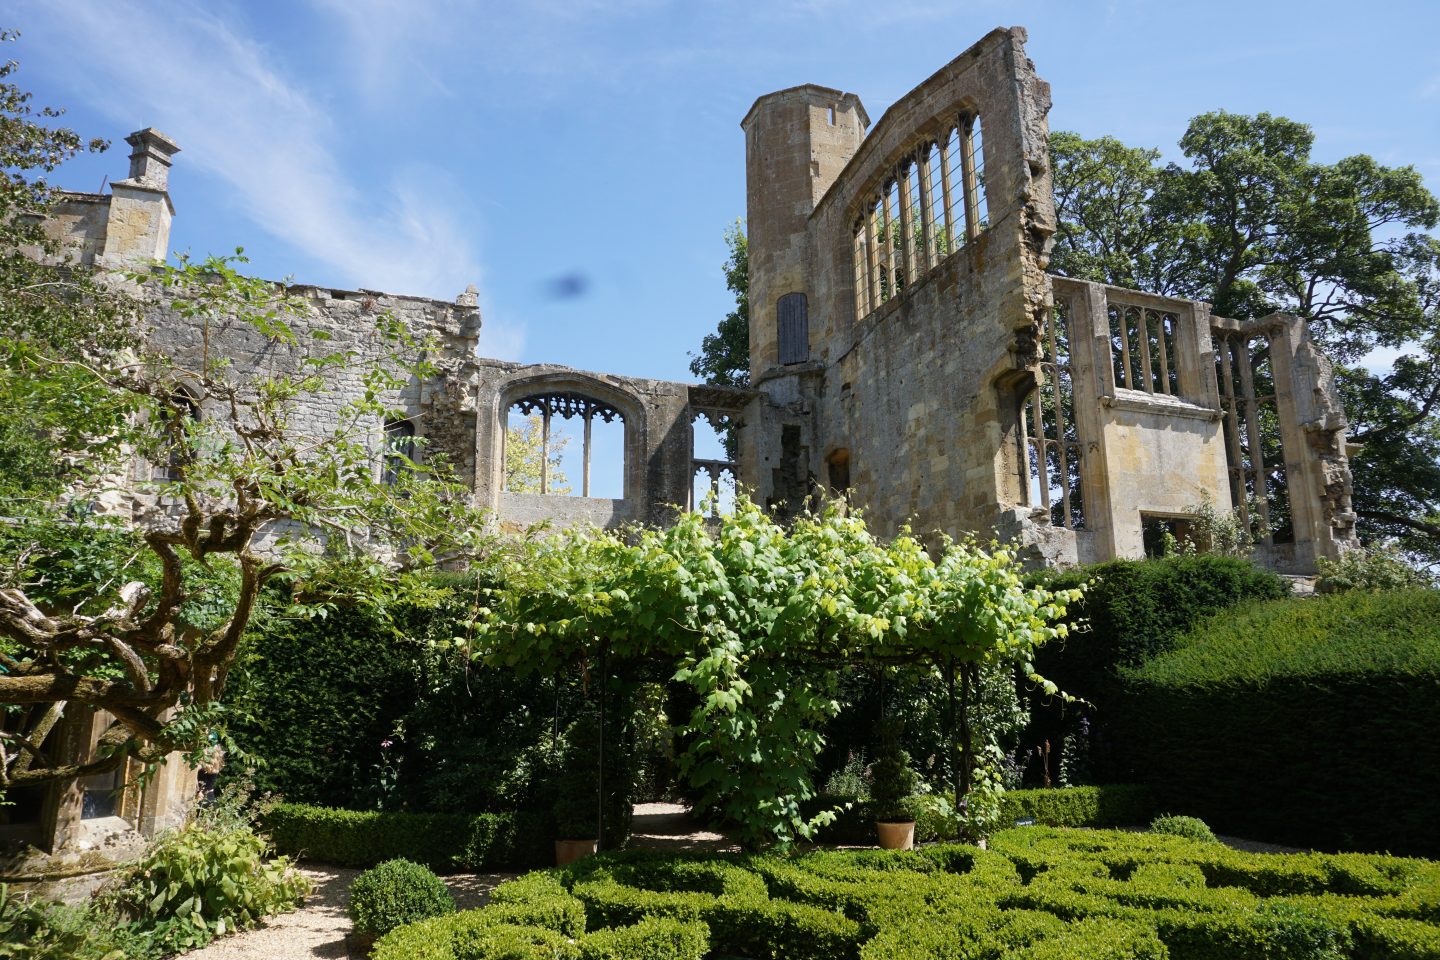 The knot garden at Sudeley Castle with the castle's ruins in the background